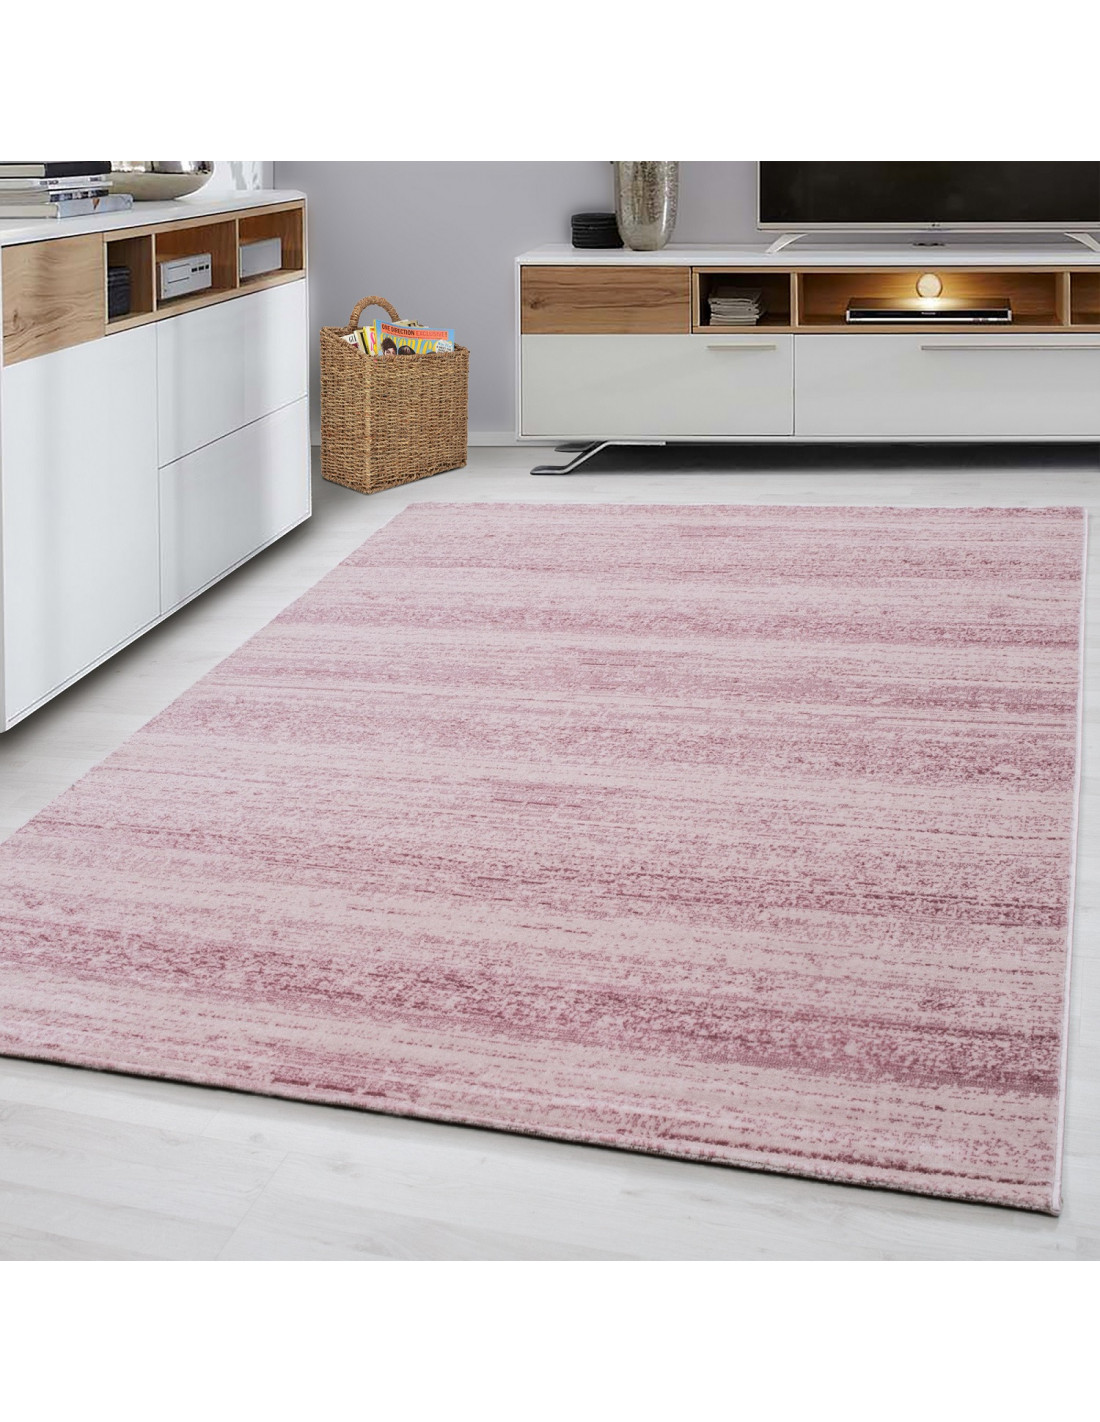 Designer living room youth room carpet wall motif checkered Plus-8000 PINK